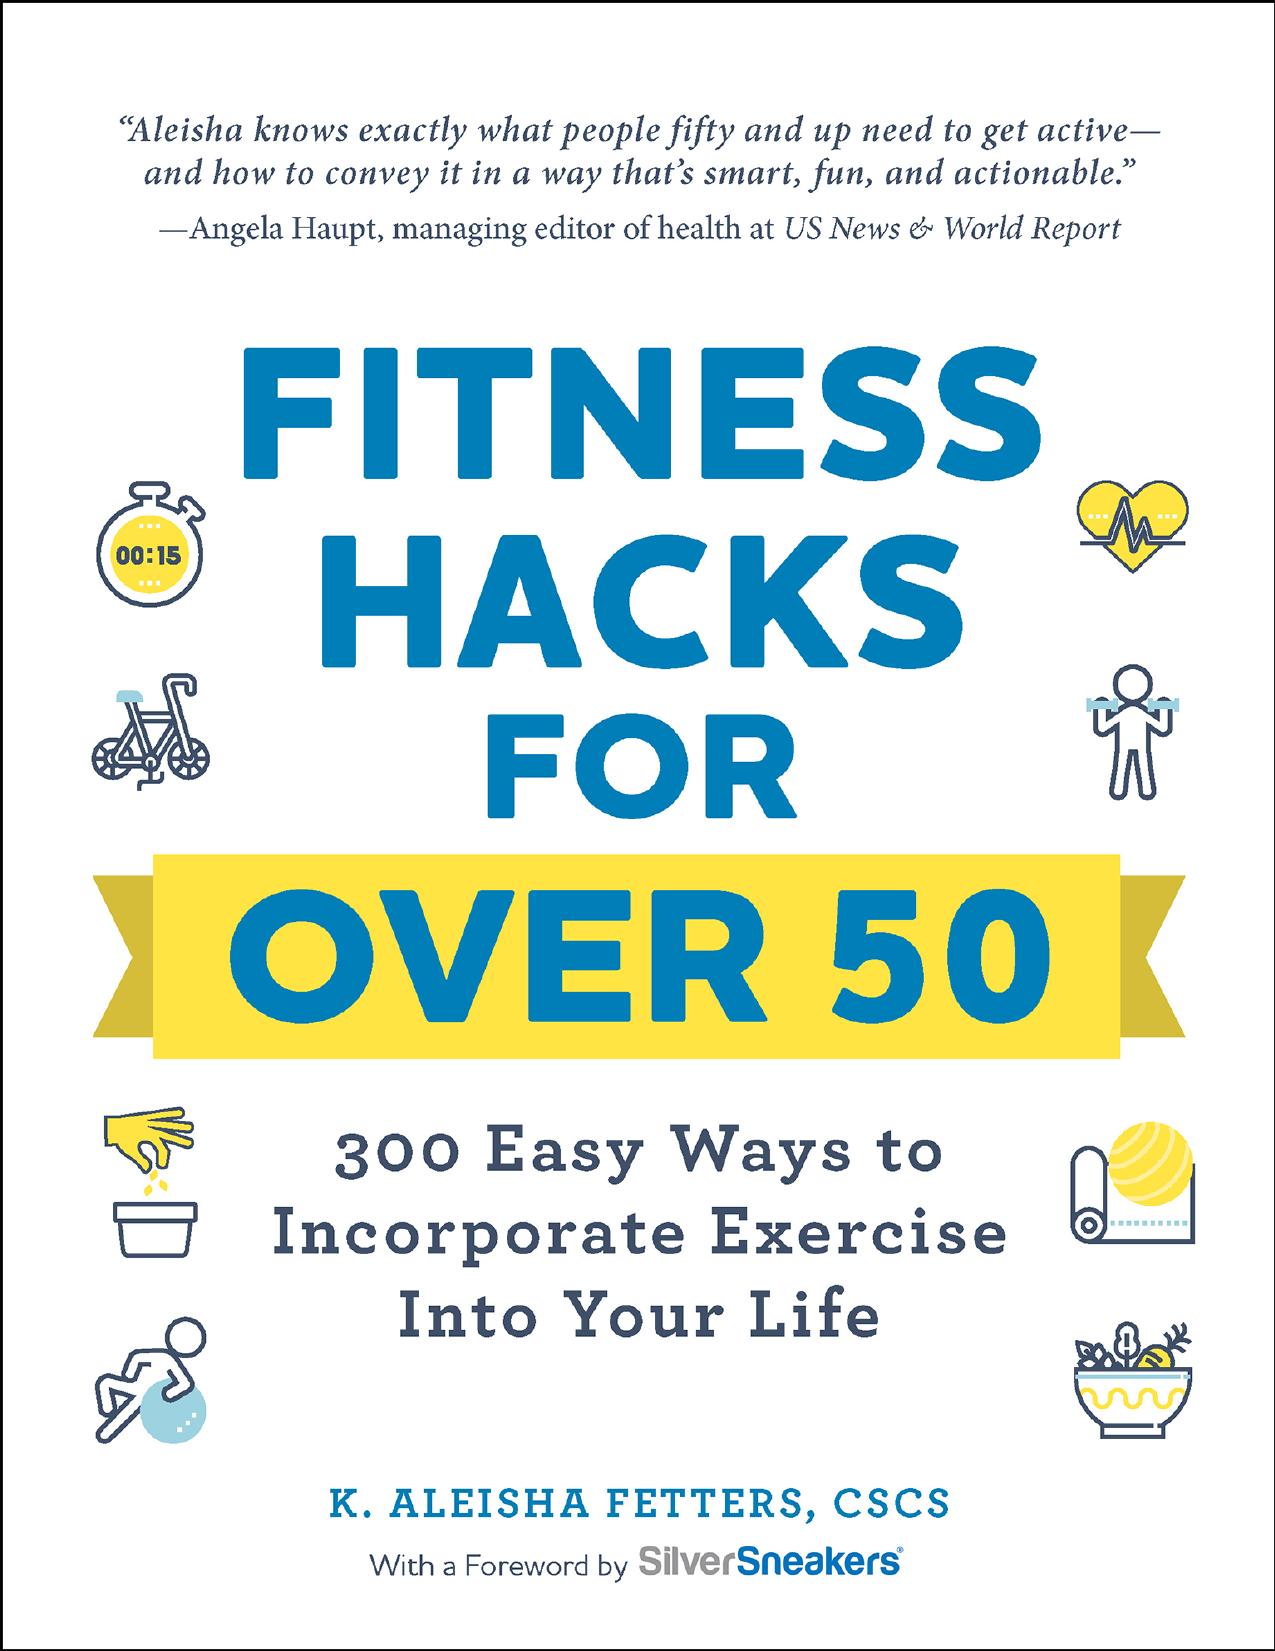 Fitness Hacks for over 50 by K. Aleisha Fetters